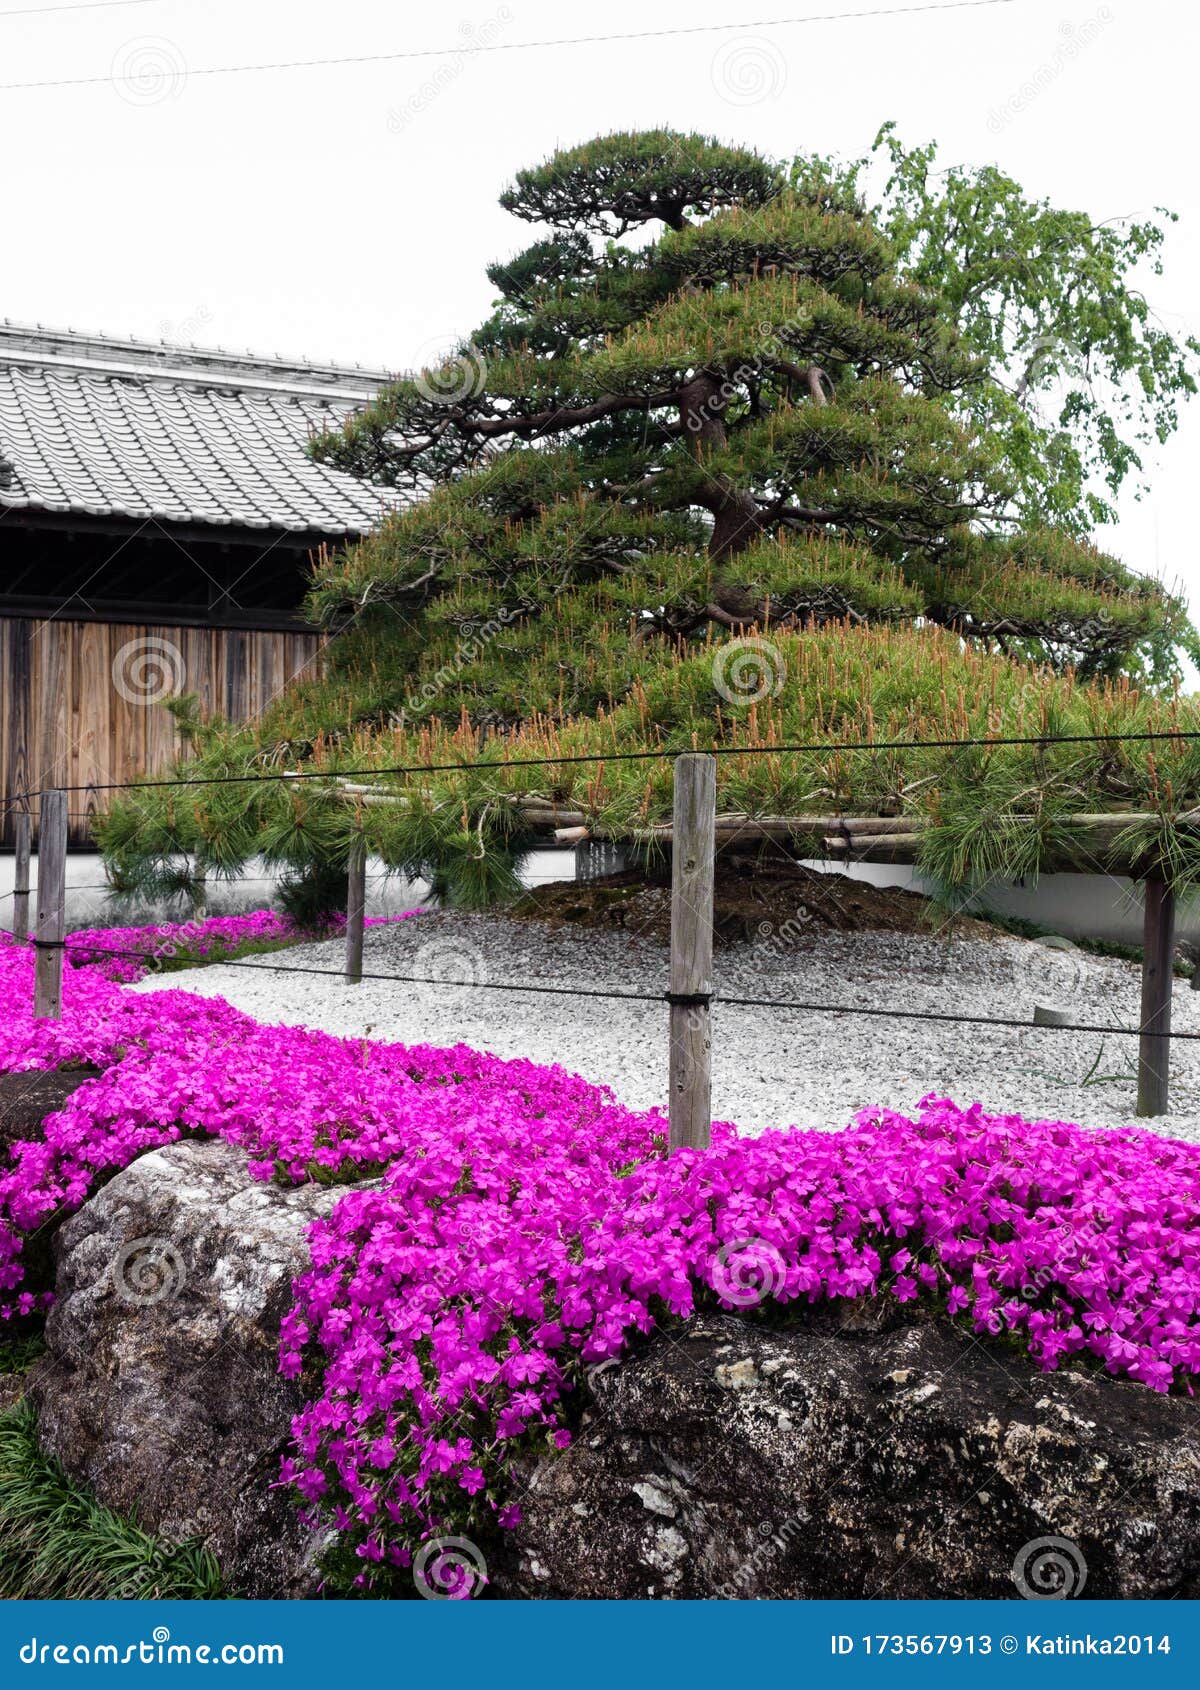 Traditional Japanese Rock Garden In Springtime Stock Image - Image of ...